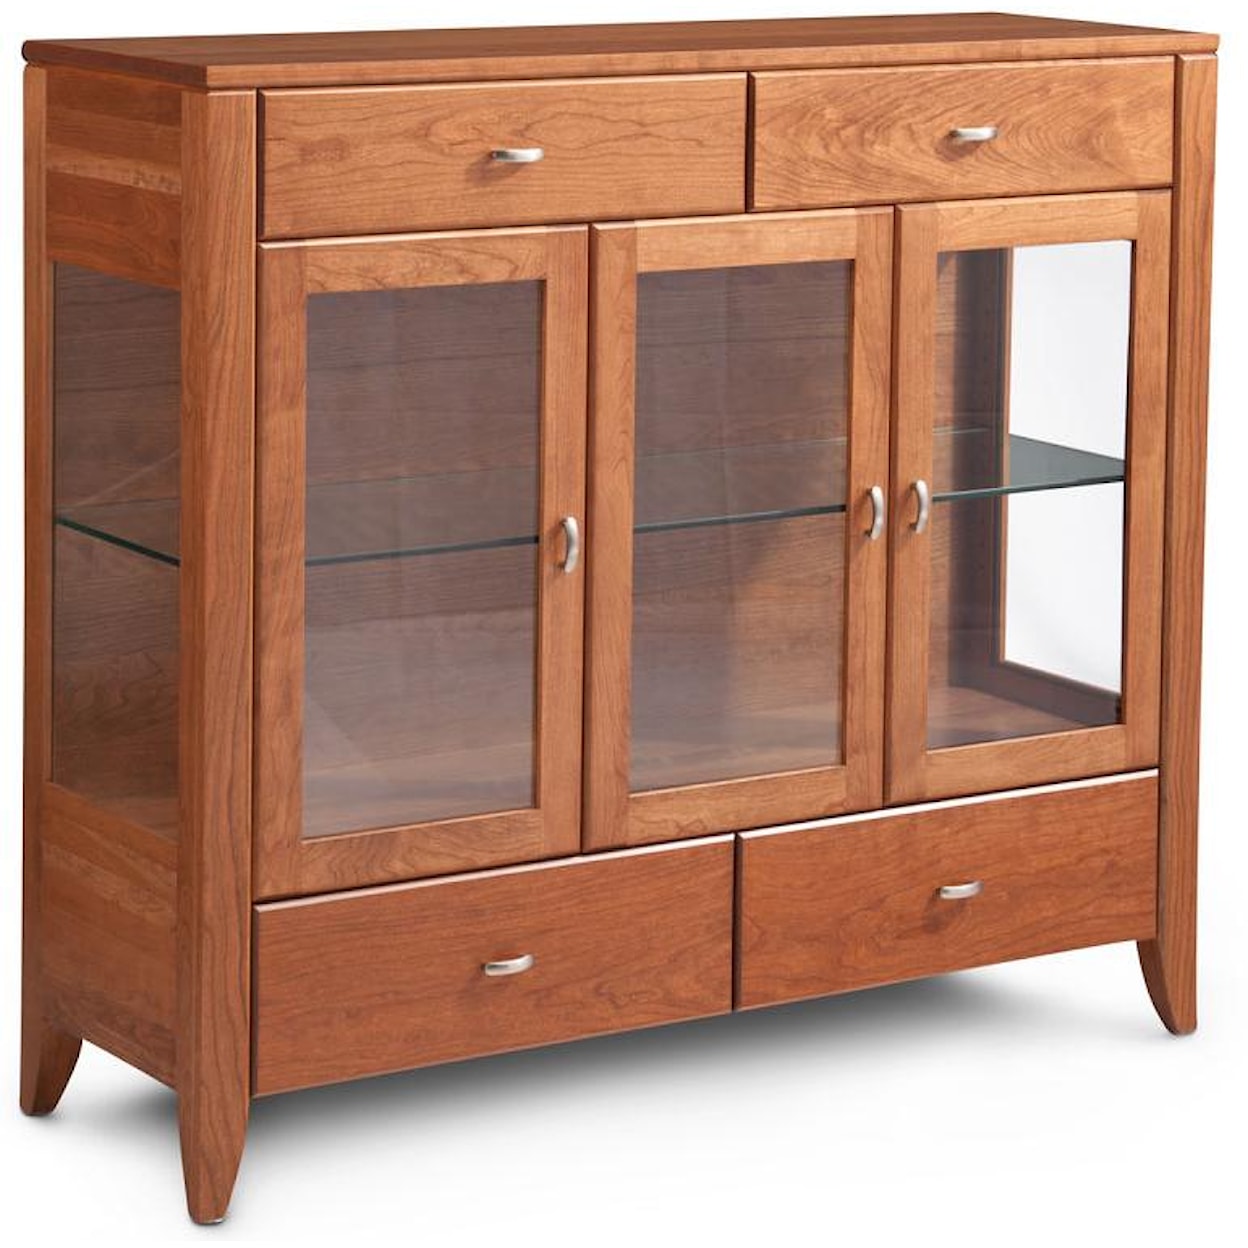 Simply Amish Justine Dining Cabinet with Plain Glass Doors